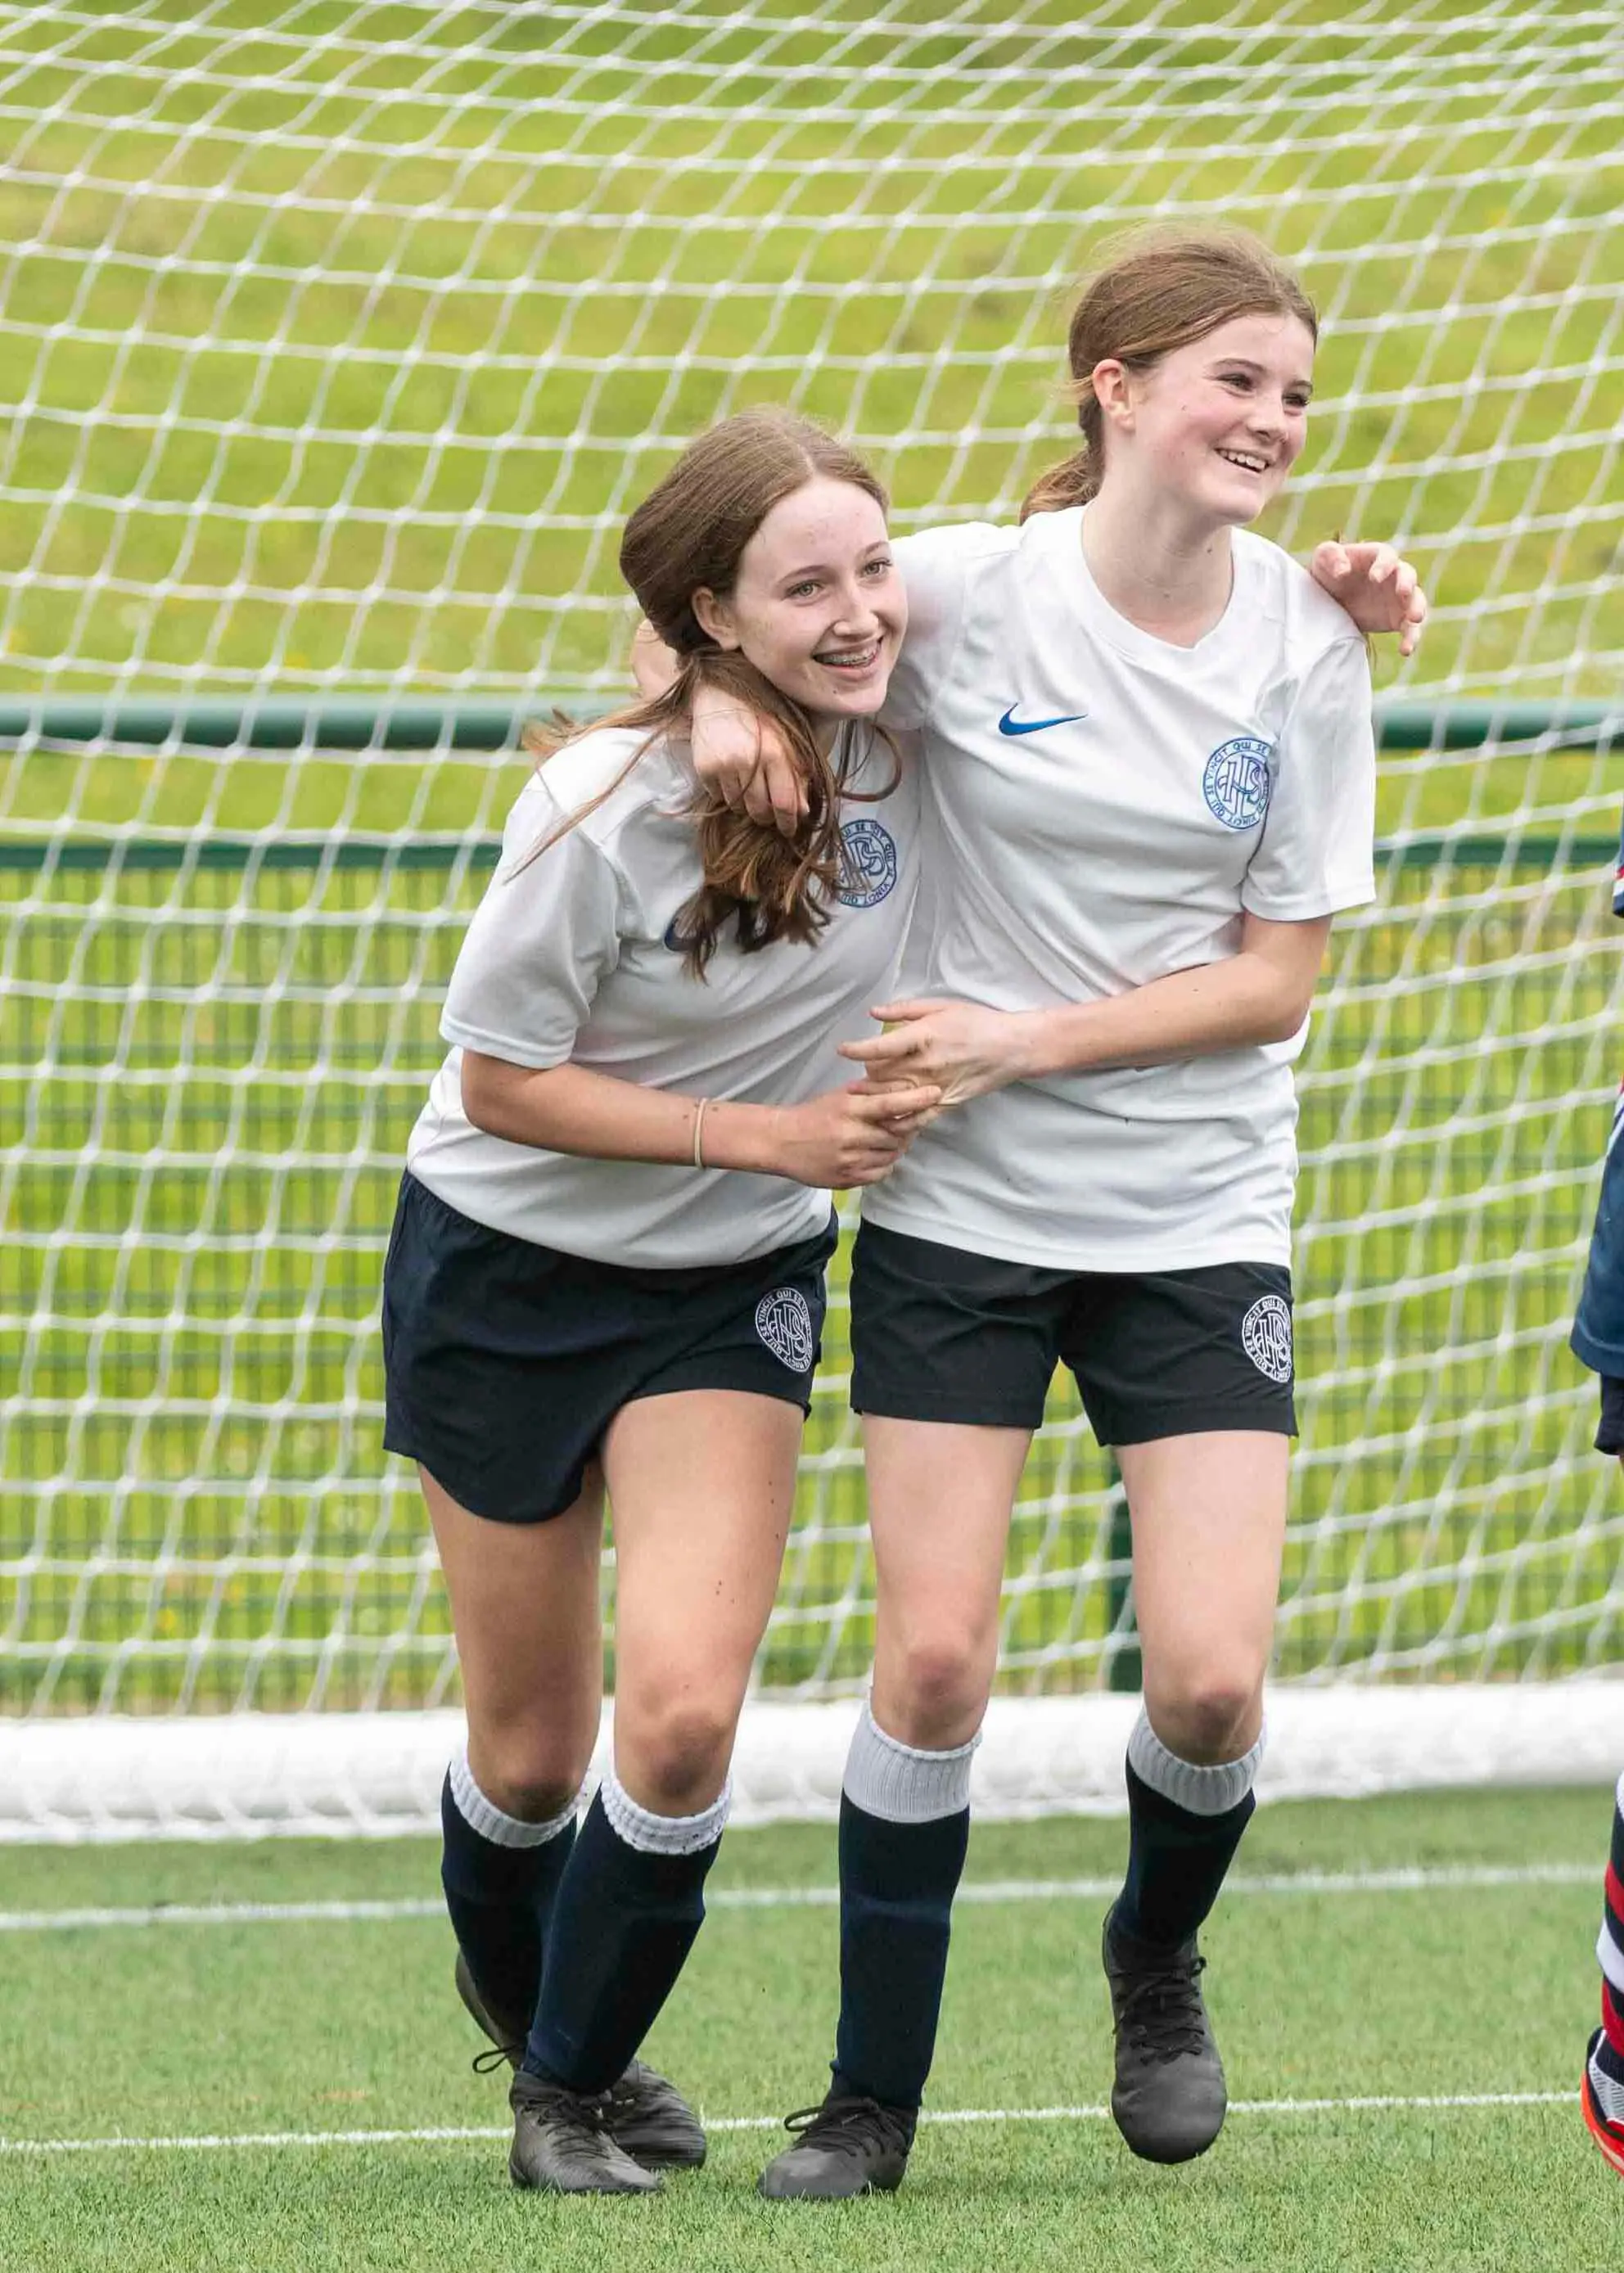 Girls celebrating their goal| Ibstock Place School, a private school near Richmond, Barnes, Putney, Kingston, and Wandsworth.